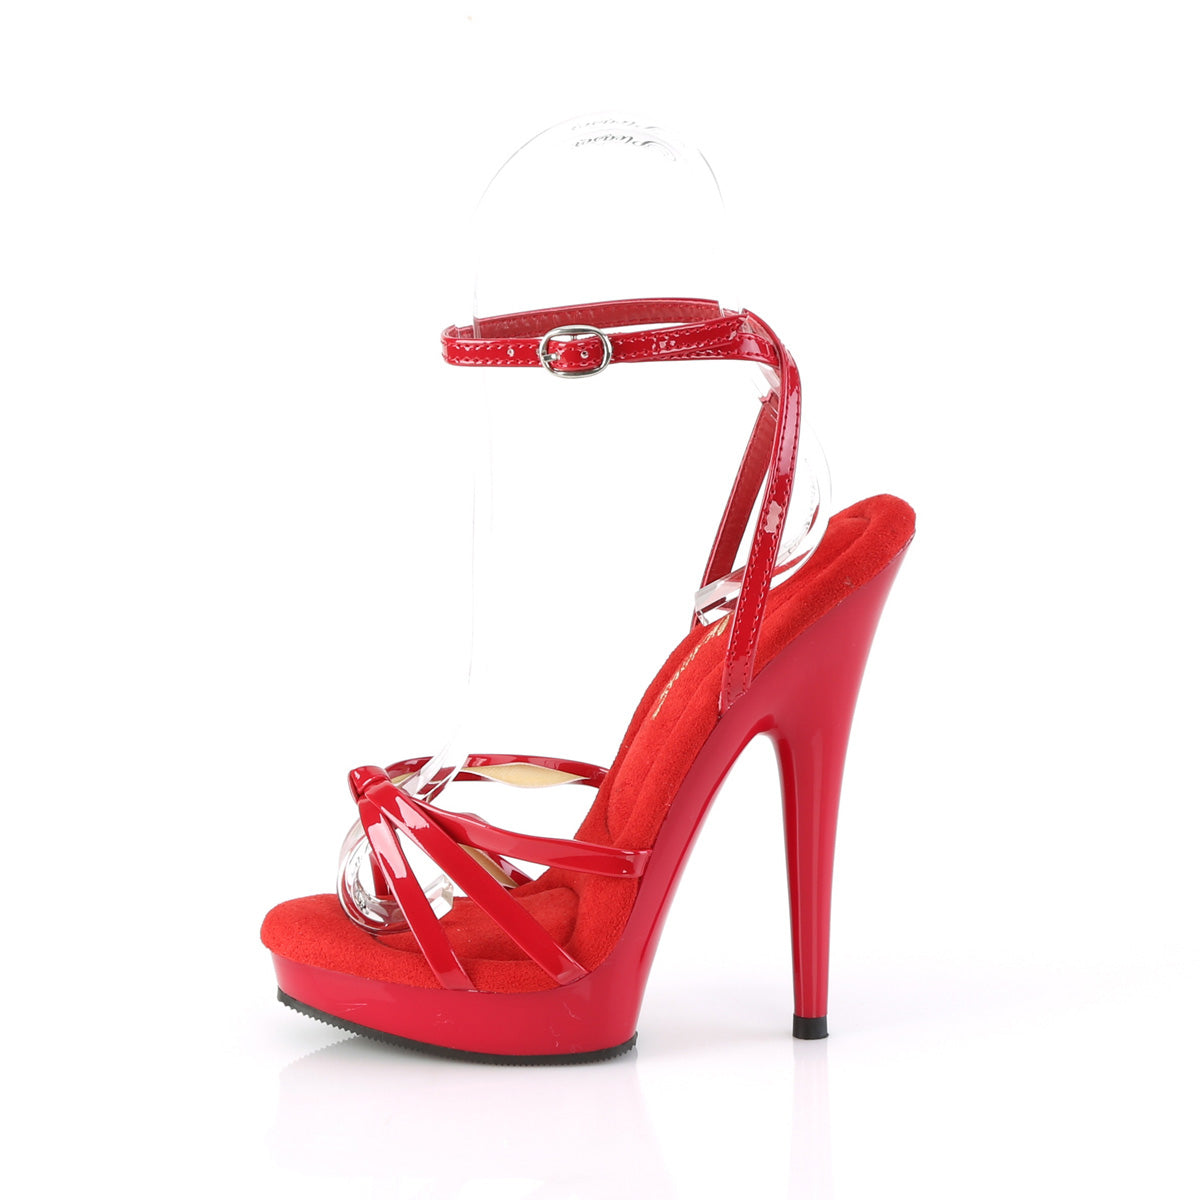 ankle strap red sandals - Sultry-638